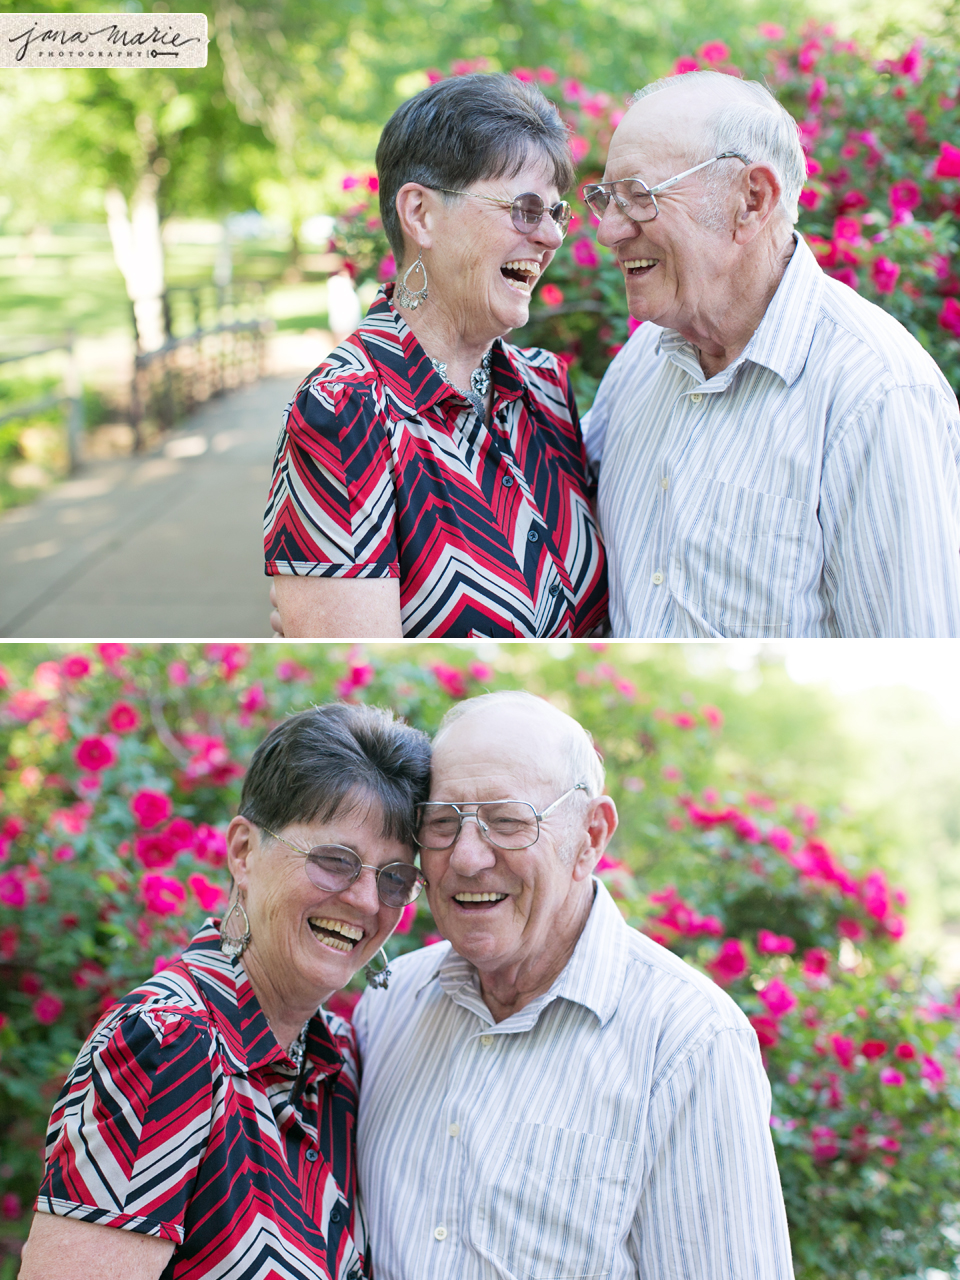 Antioch Park photography, Kansas portrait photographer, Jana Marler, married 50 years, Beloved couples, parents in love